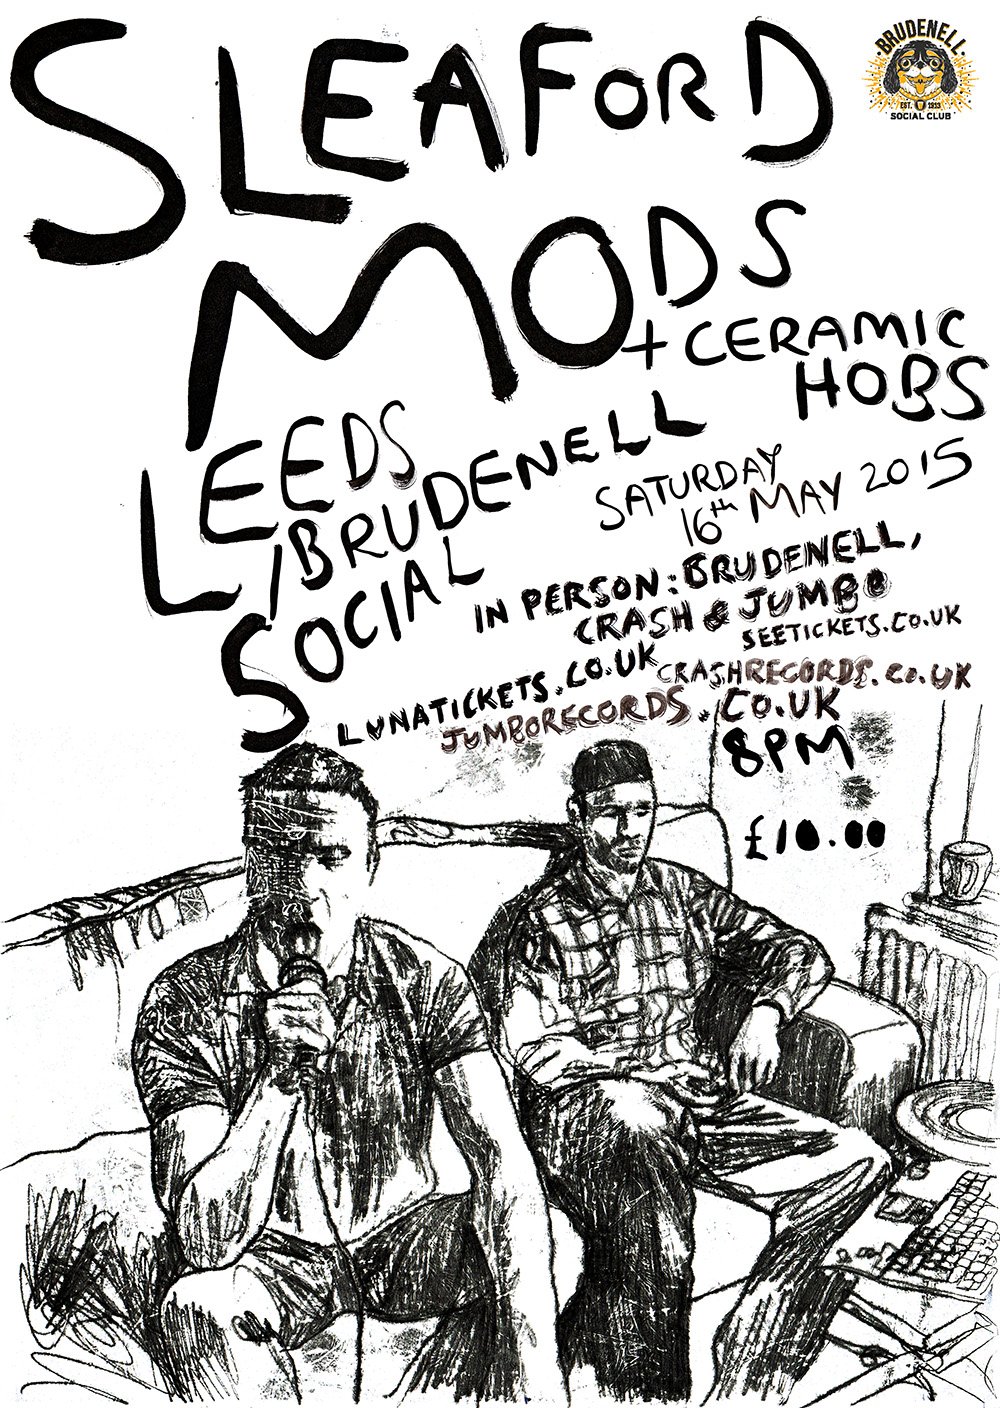 Image of SLEAFORD MODS Tour Poster